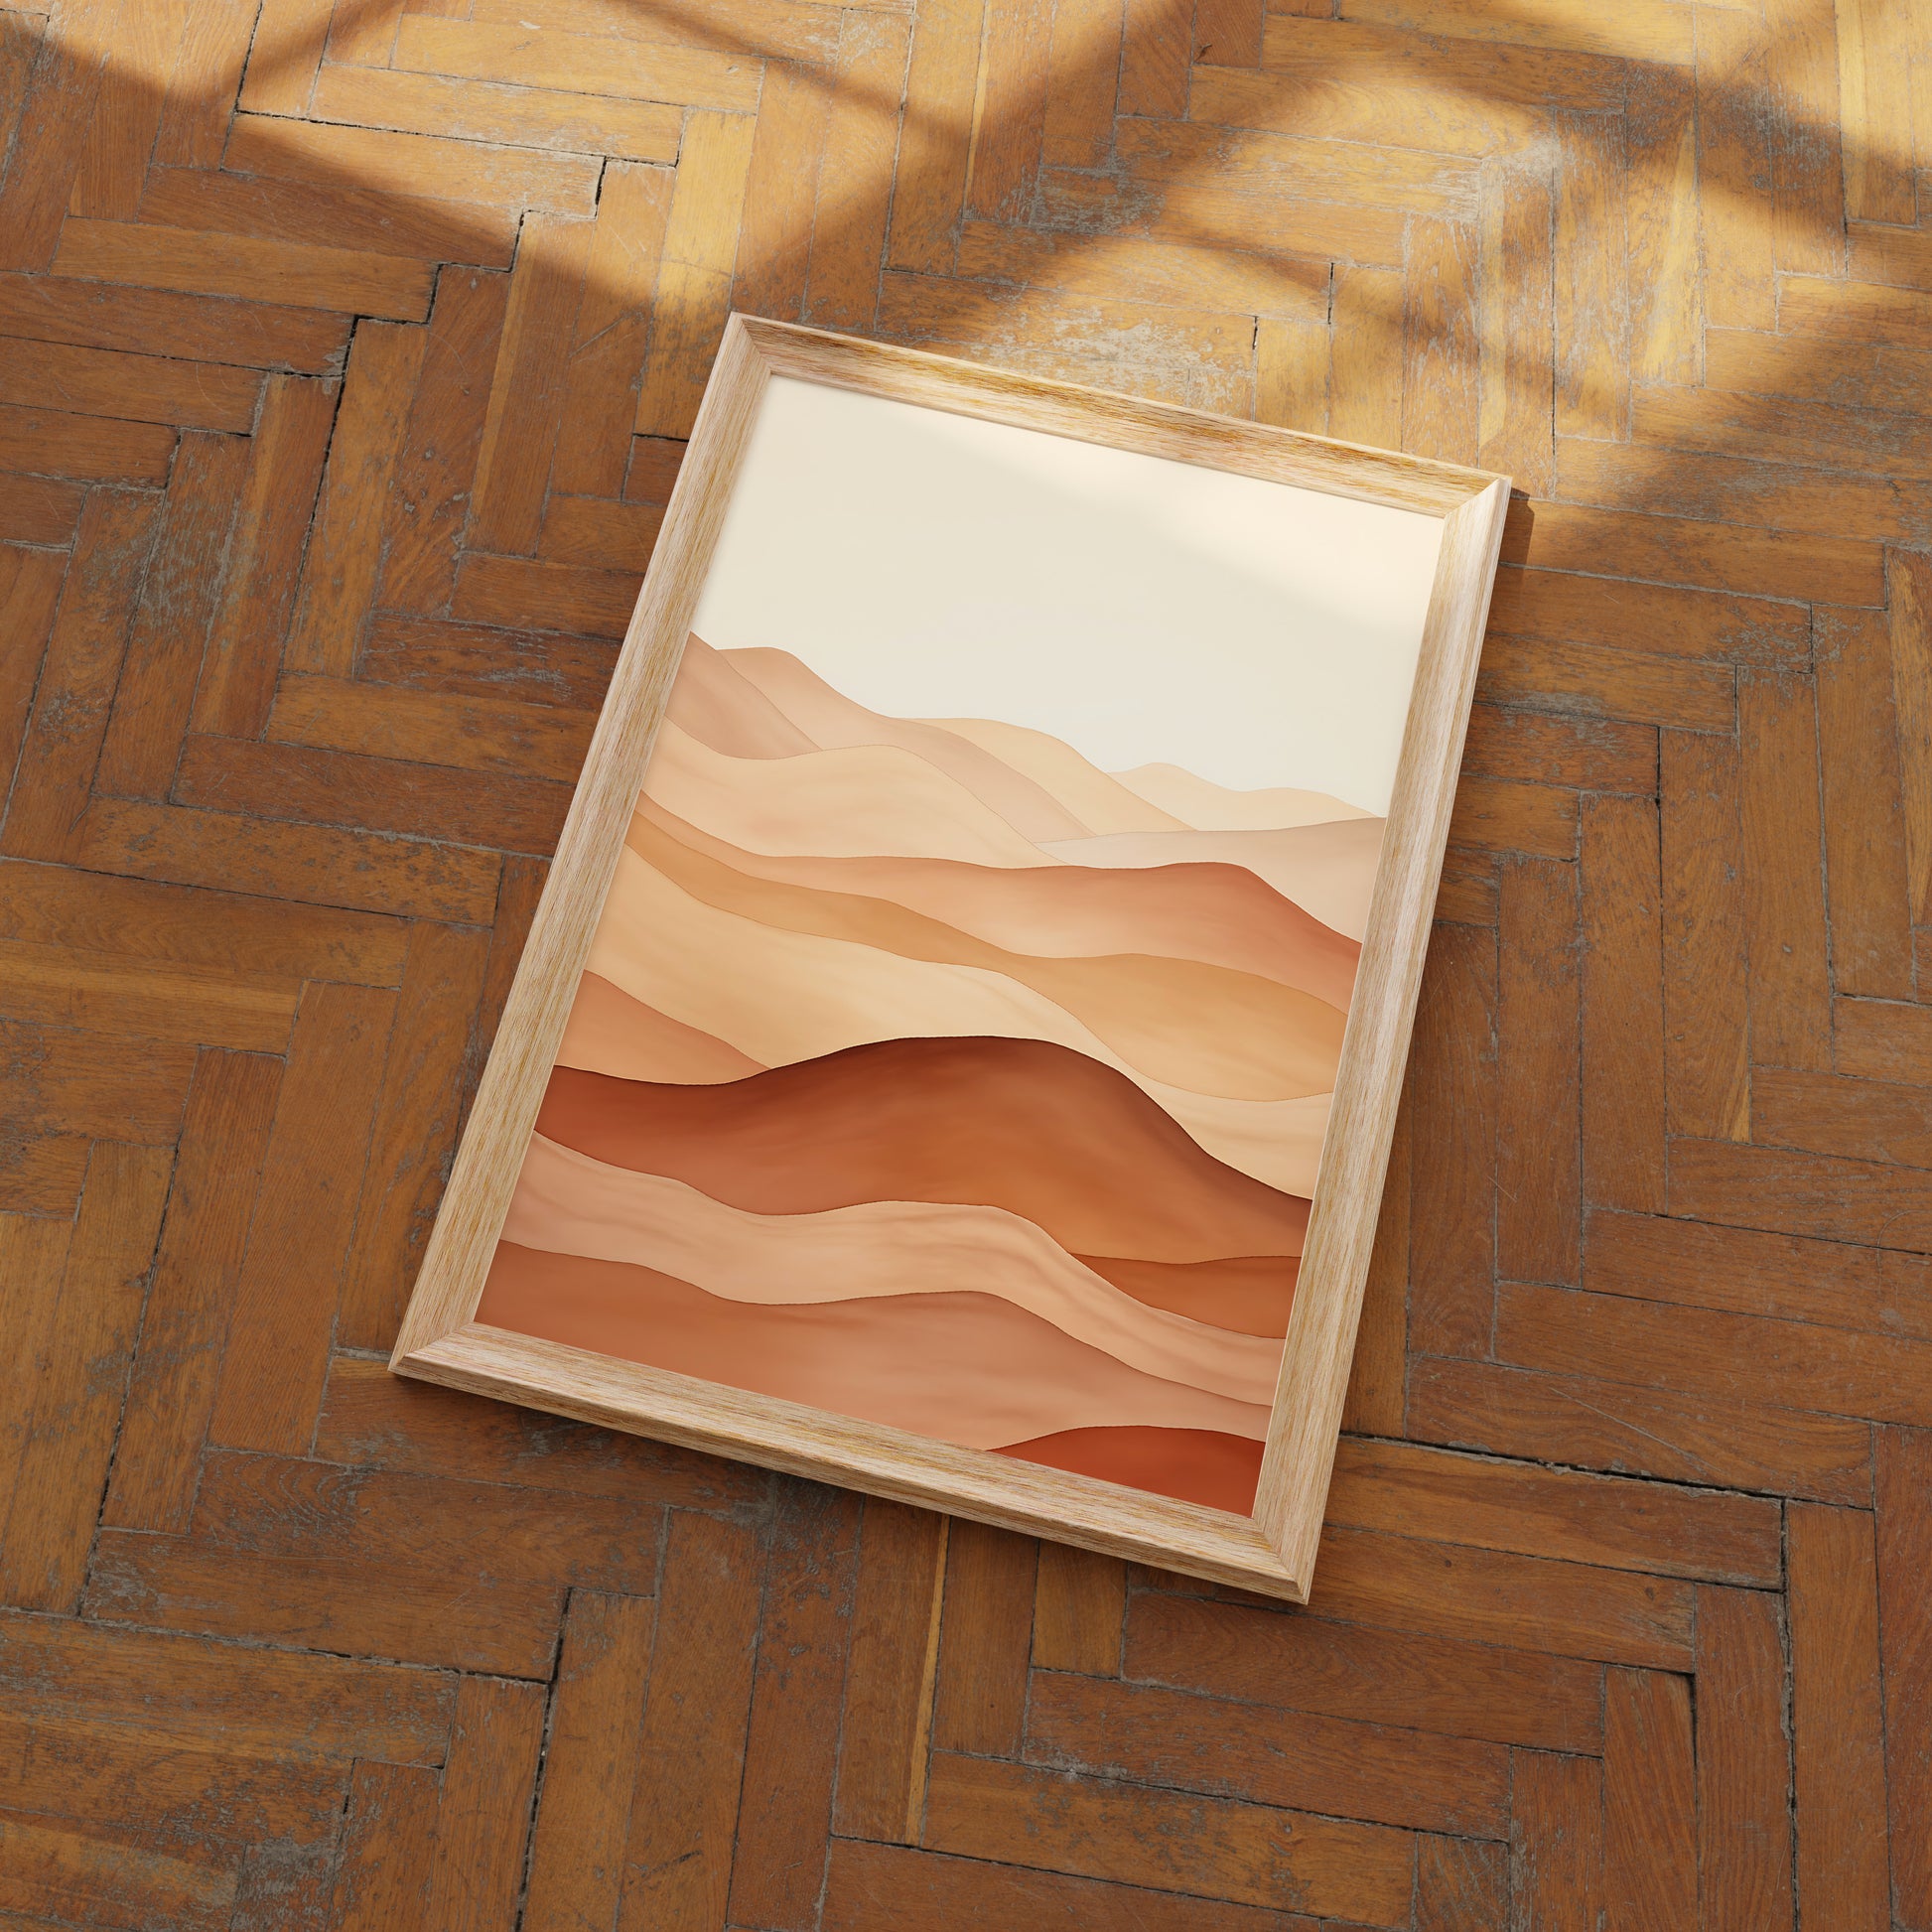 Wooden frame with an abstract desert landscape print on a herringbone parquet floor.